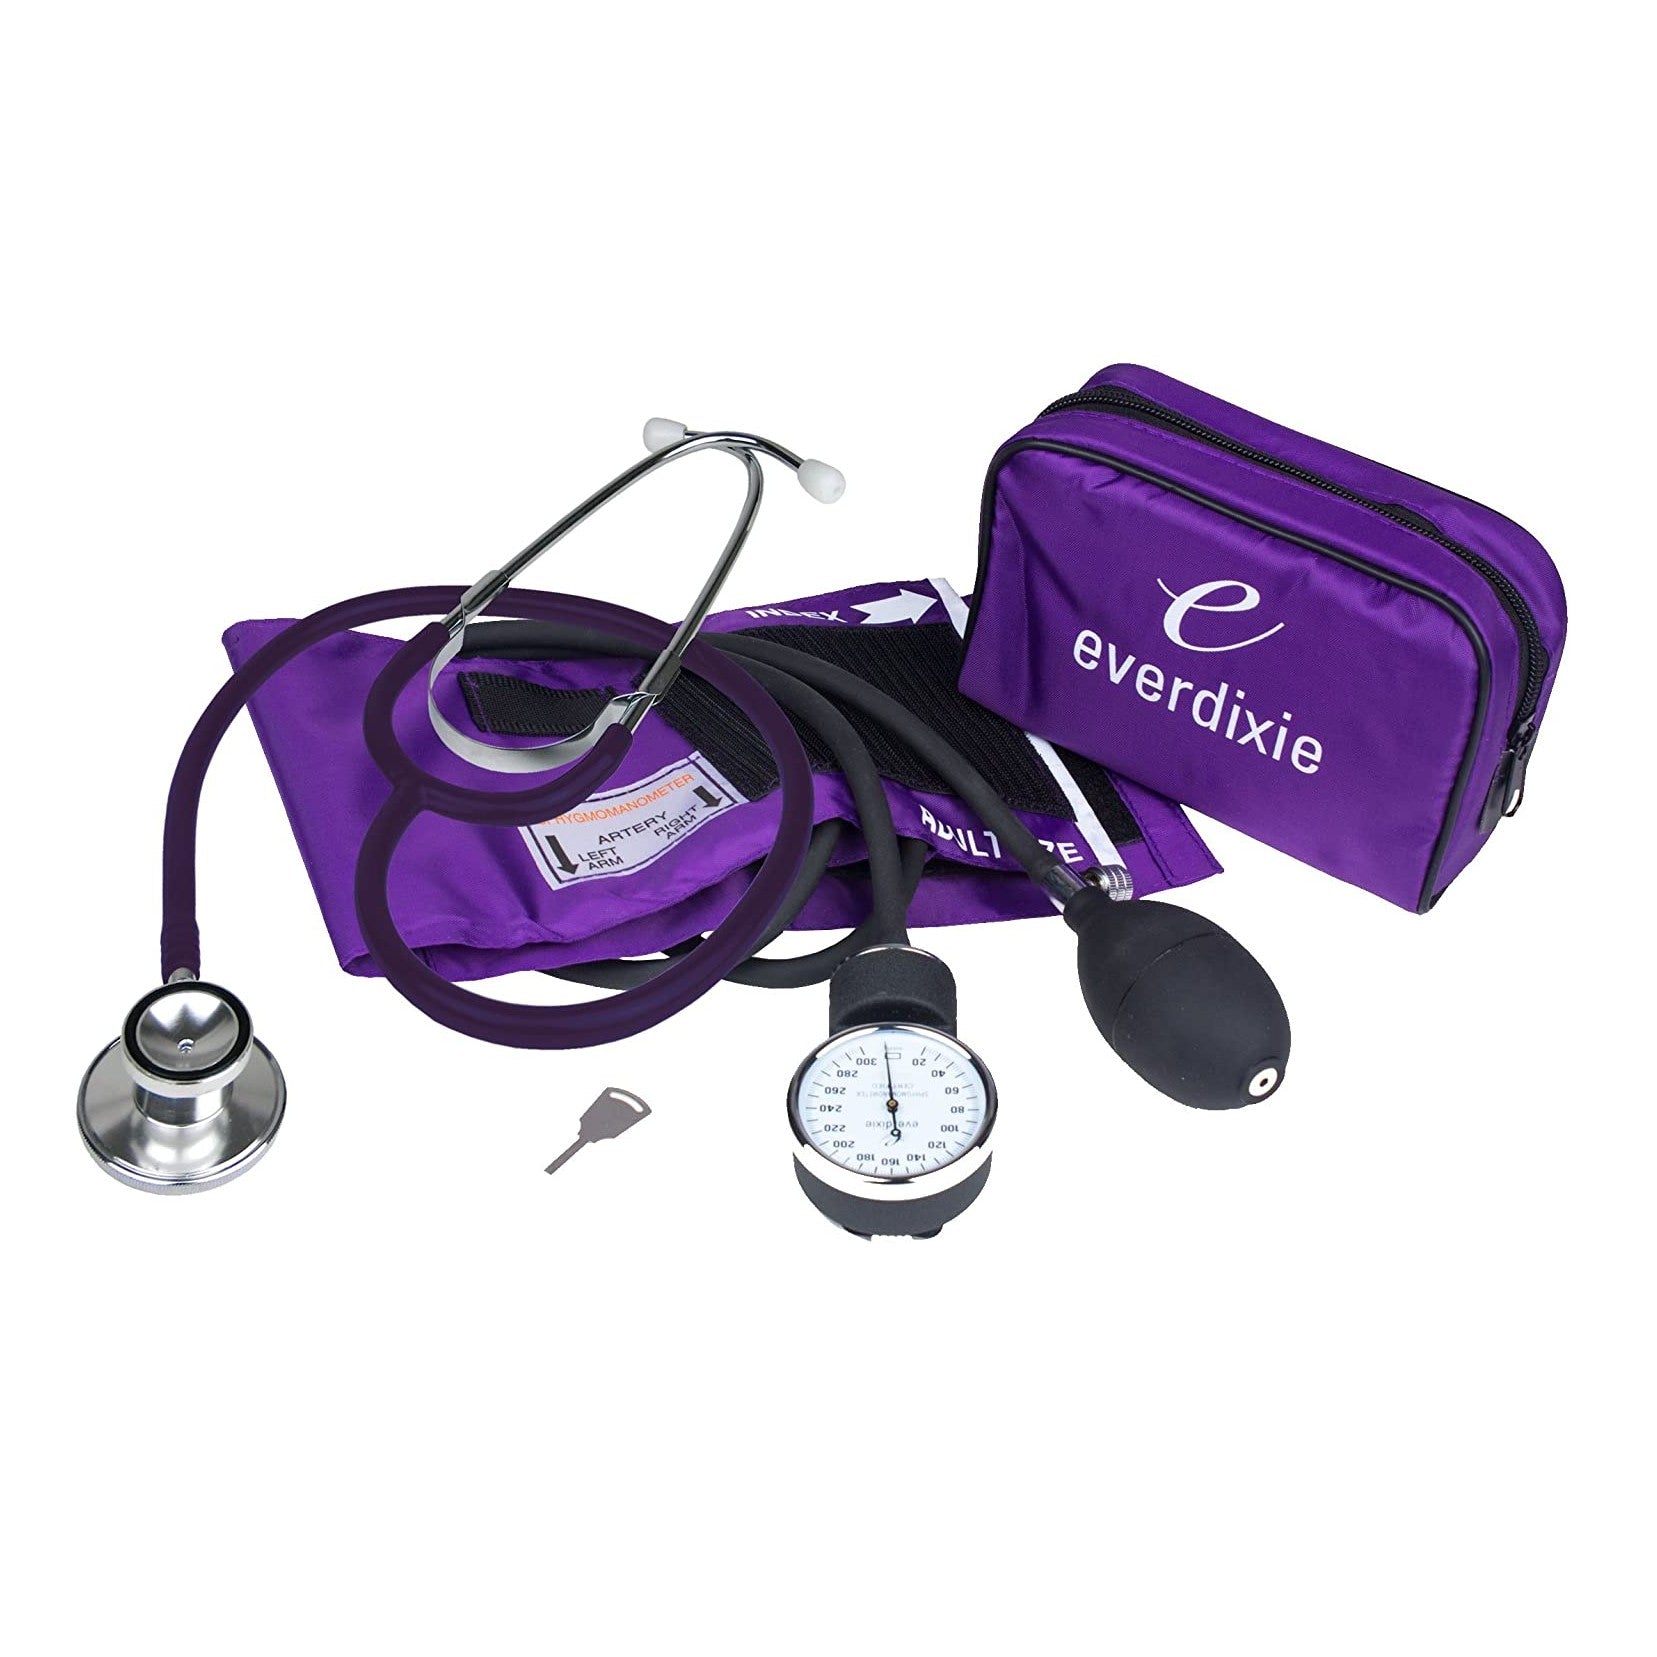 Dixie EMS Deluxe Aneroid Sphygmomanometer Blood Pressure Set W/Adult Cuff,  Carrying Case and Calibration Tool - Black